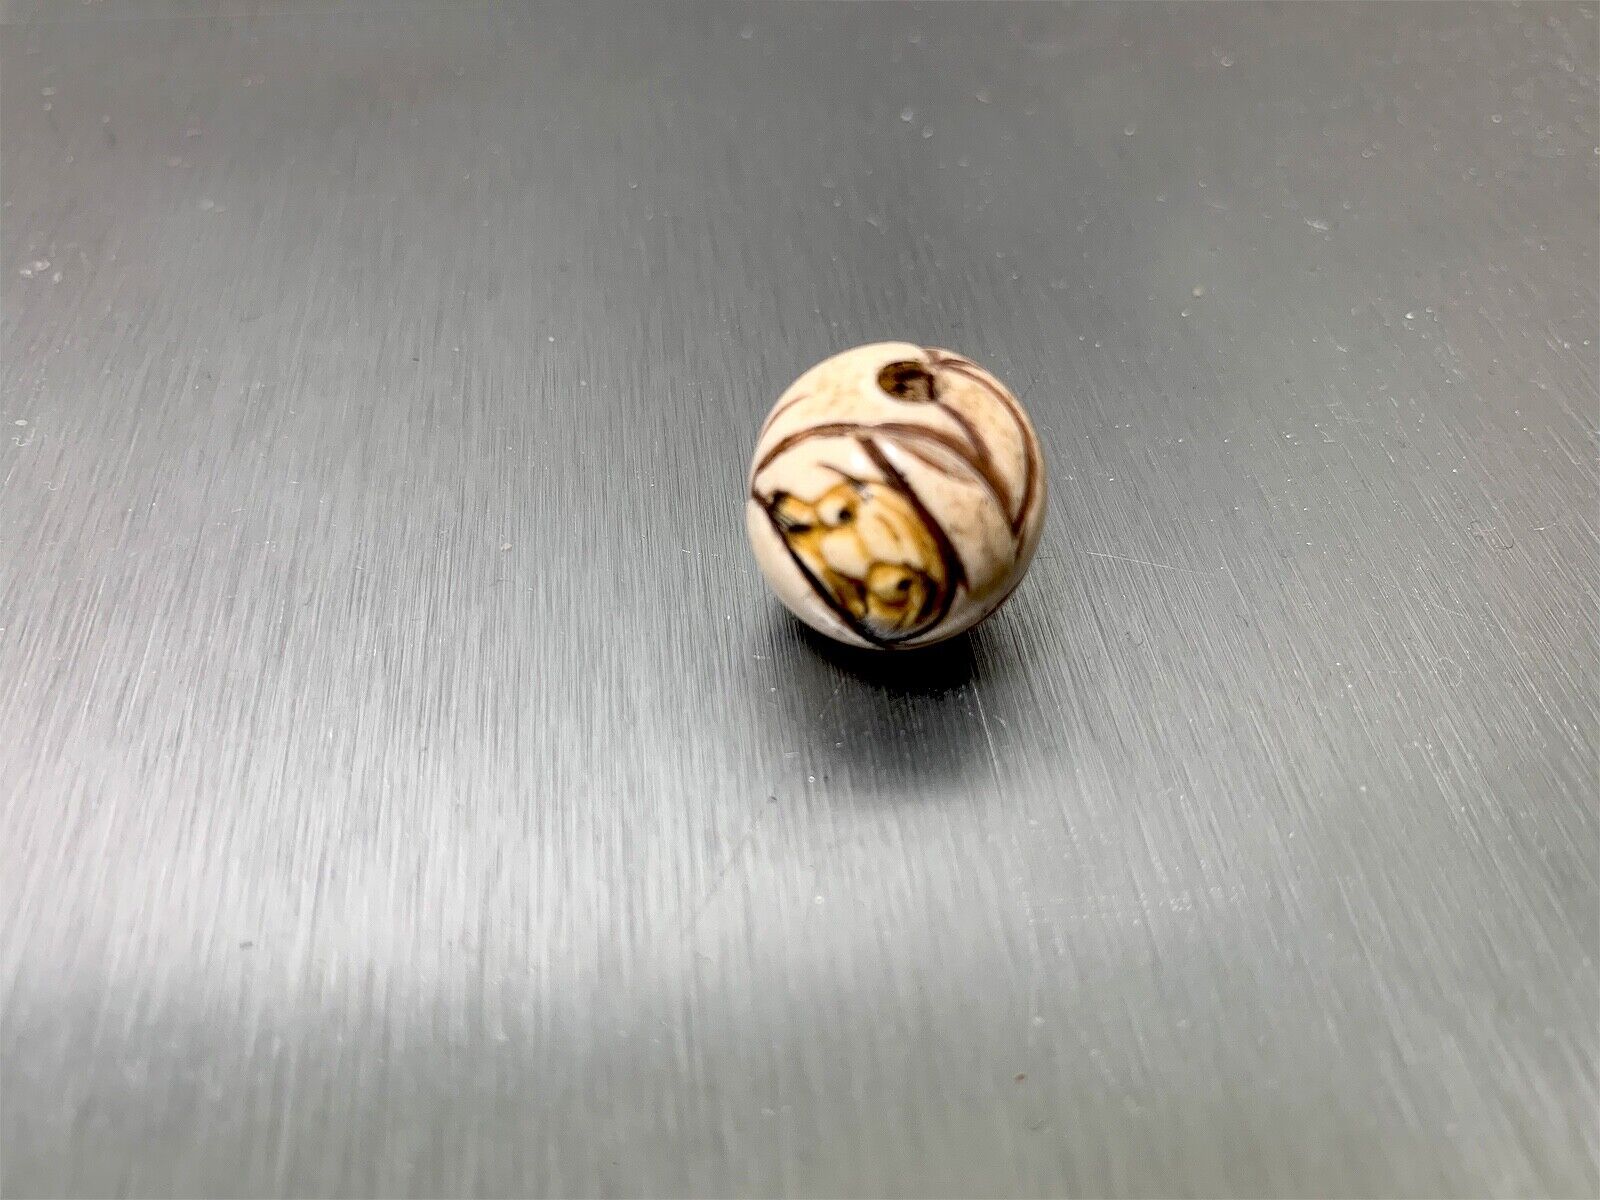 Vintage Antique Japanese Wooden Ojime Bead Cream and Brown Color